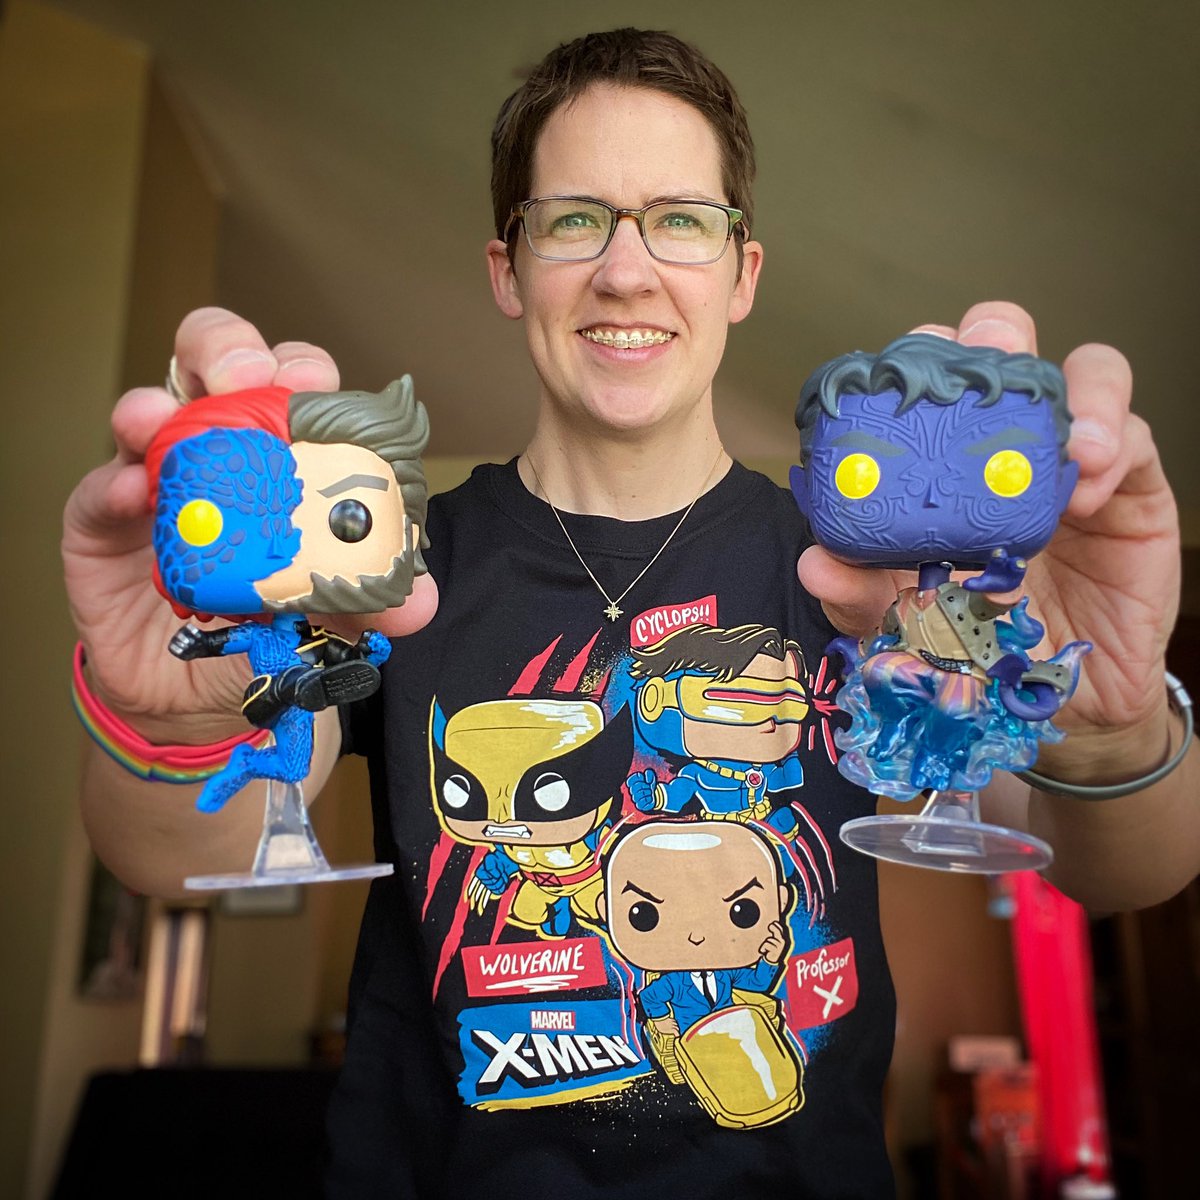 Fun on #FunkoFashionFriday with some fantastic friends from X-Men - Mystique (morphing into Logan!) and Nightcrawler, plus Cyclops, Wolverine, and Professor X! 

#xmen #collectorcorps #20thanniversary #funko #funkohollywood #theunitedfunkofamily #funkosouth